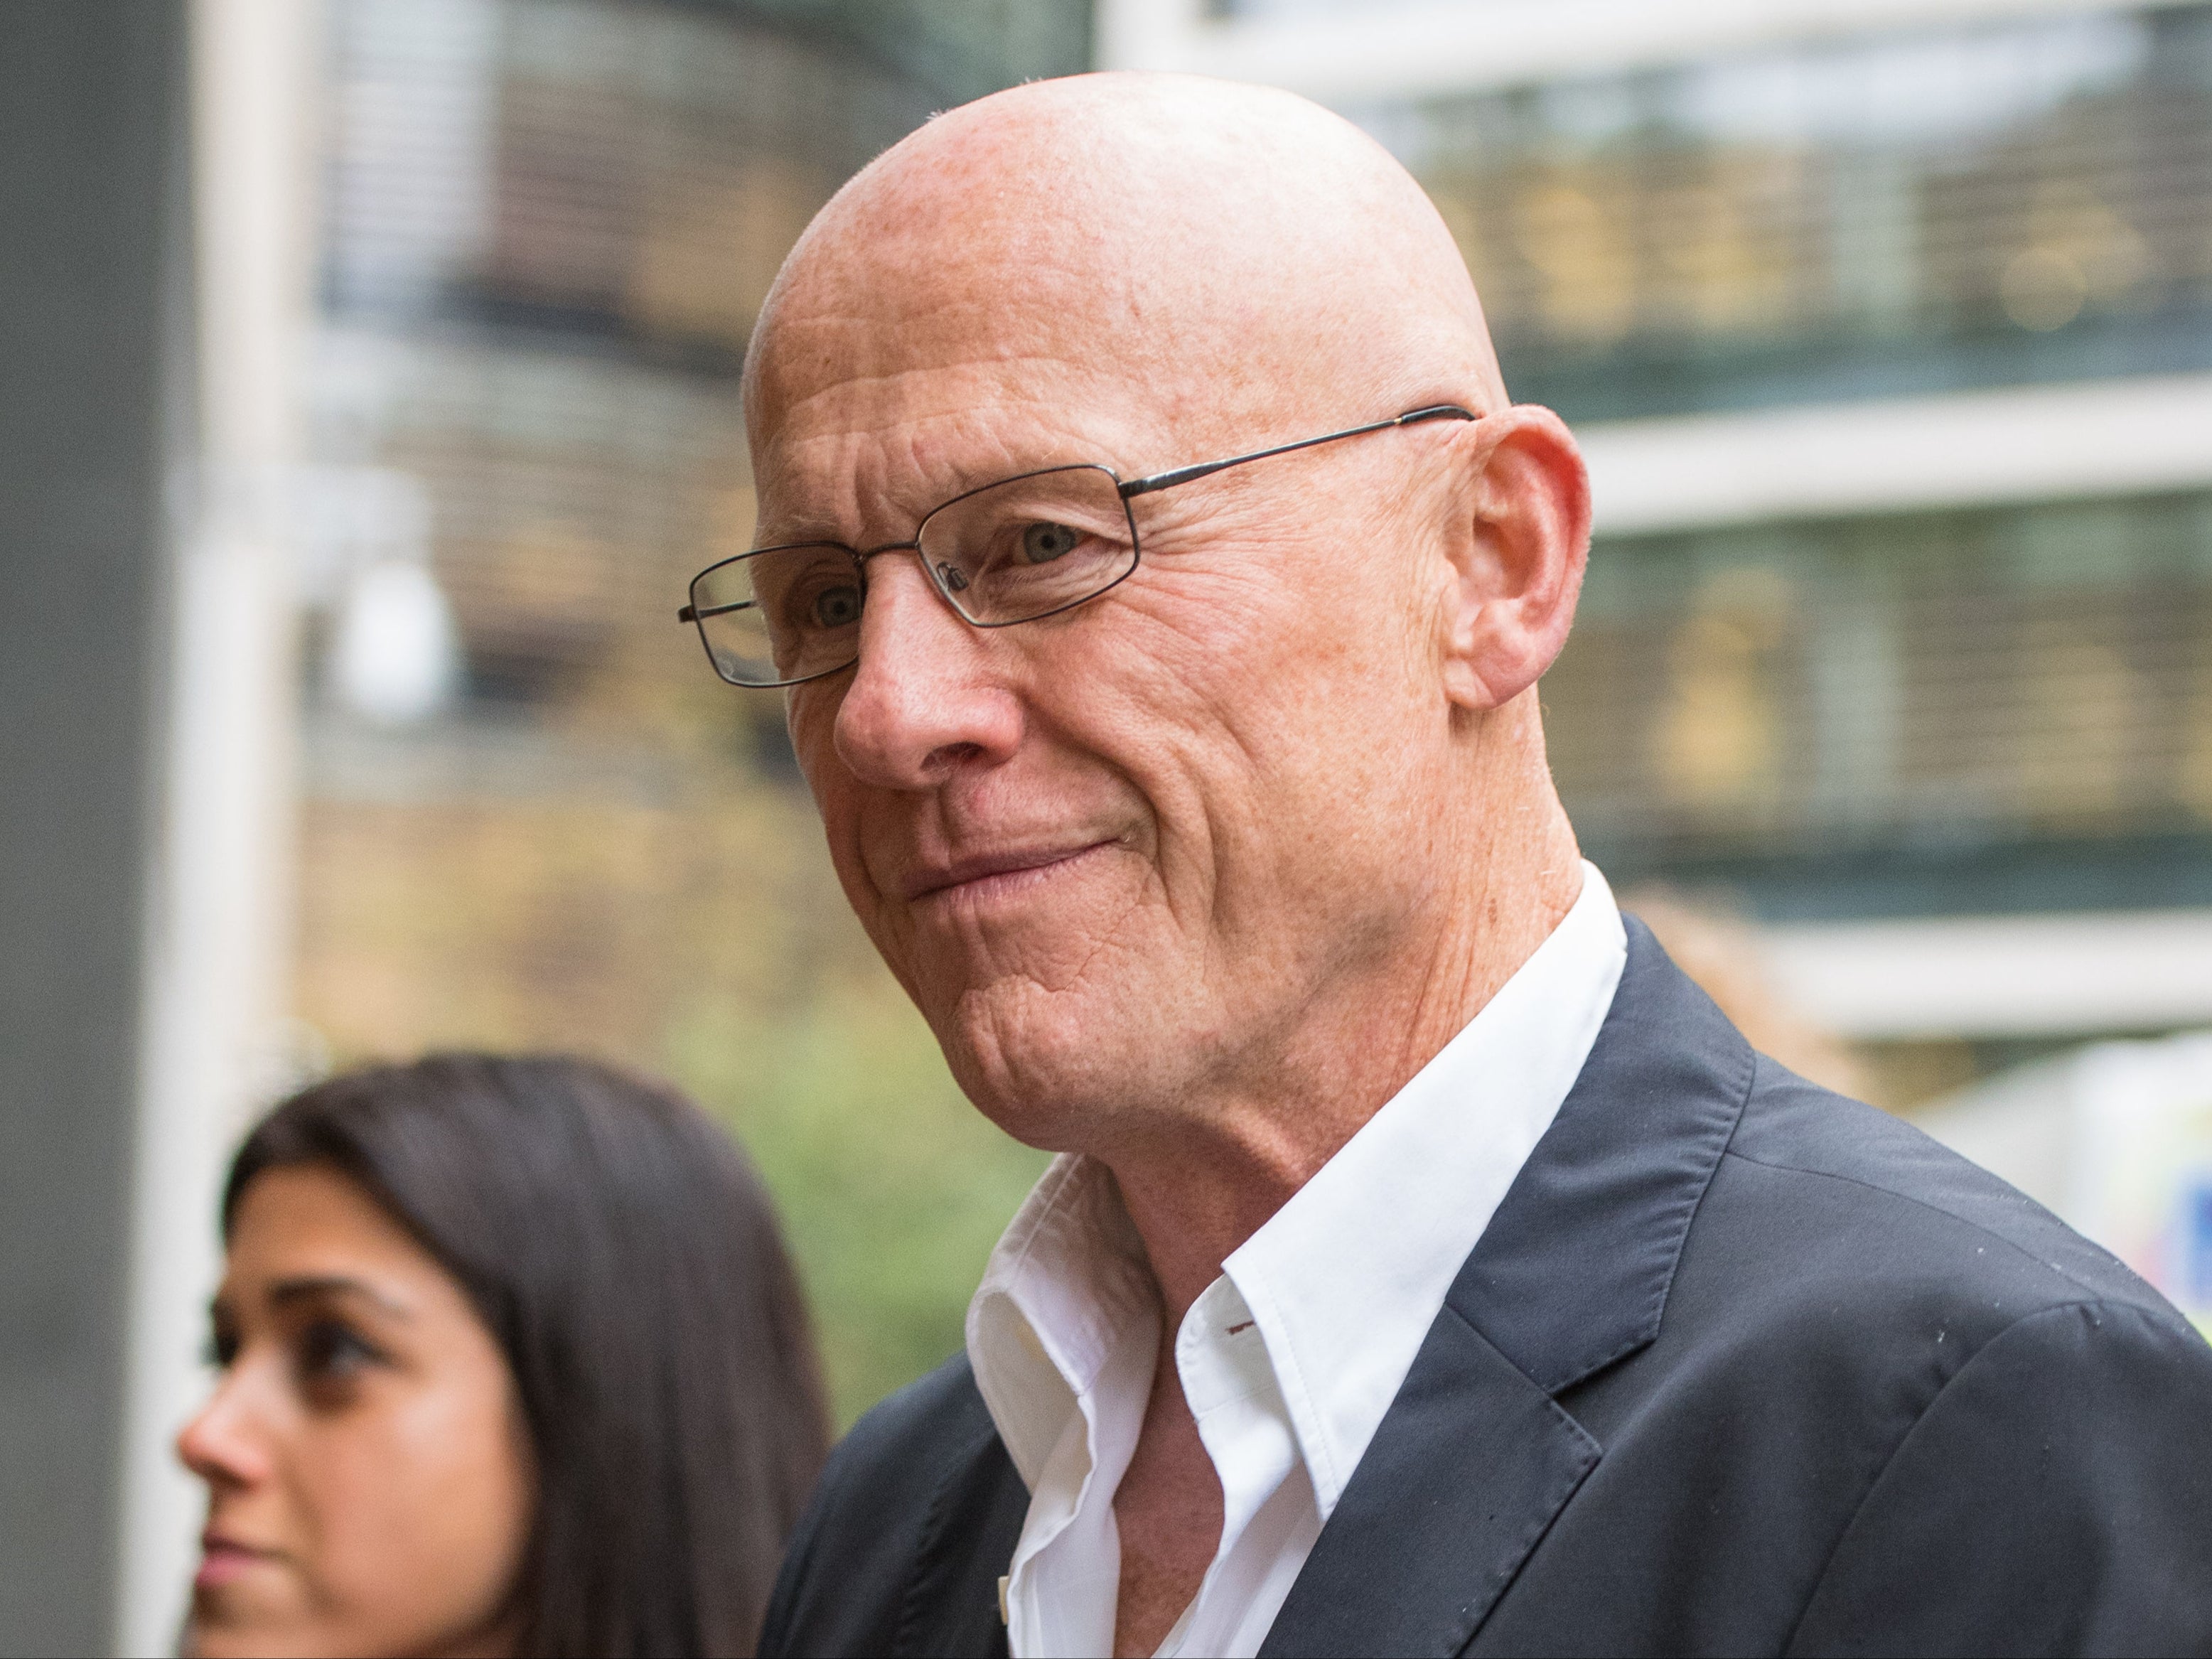 Phones4u founder John Caudwell suggested he might give to Labour if the party invests in net zero